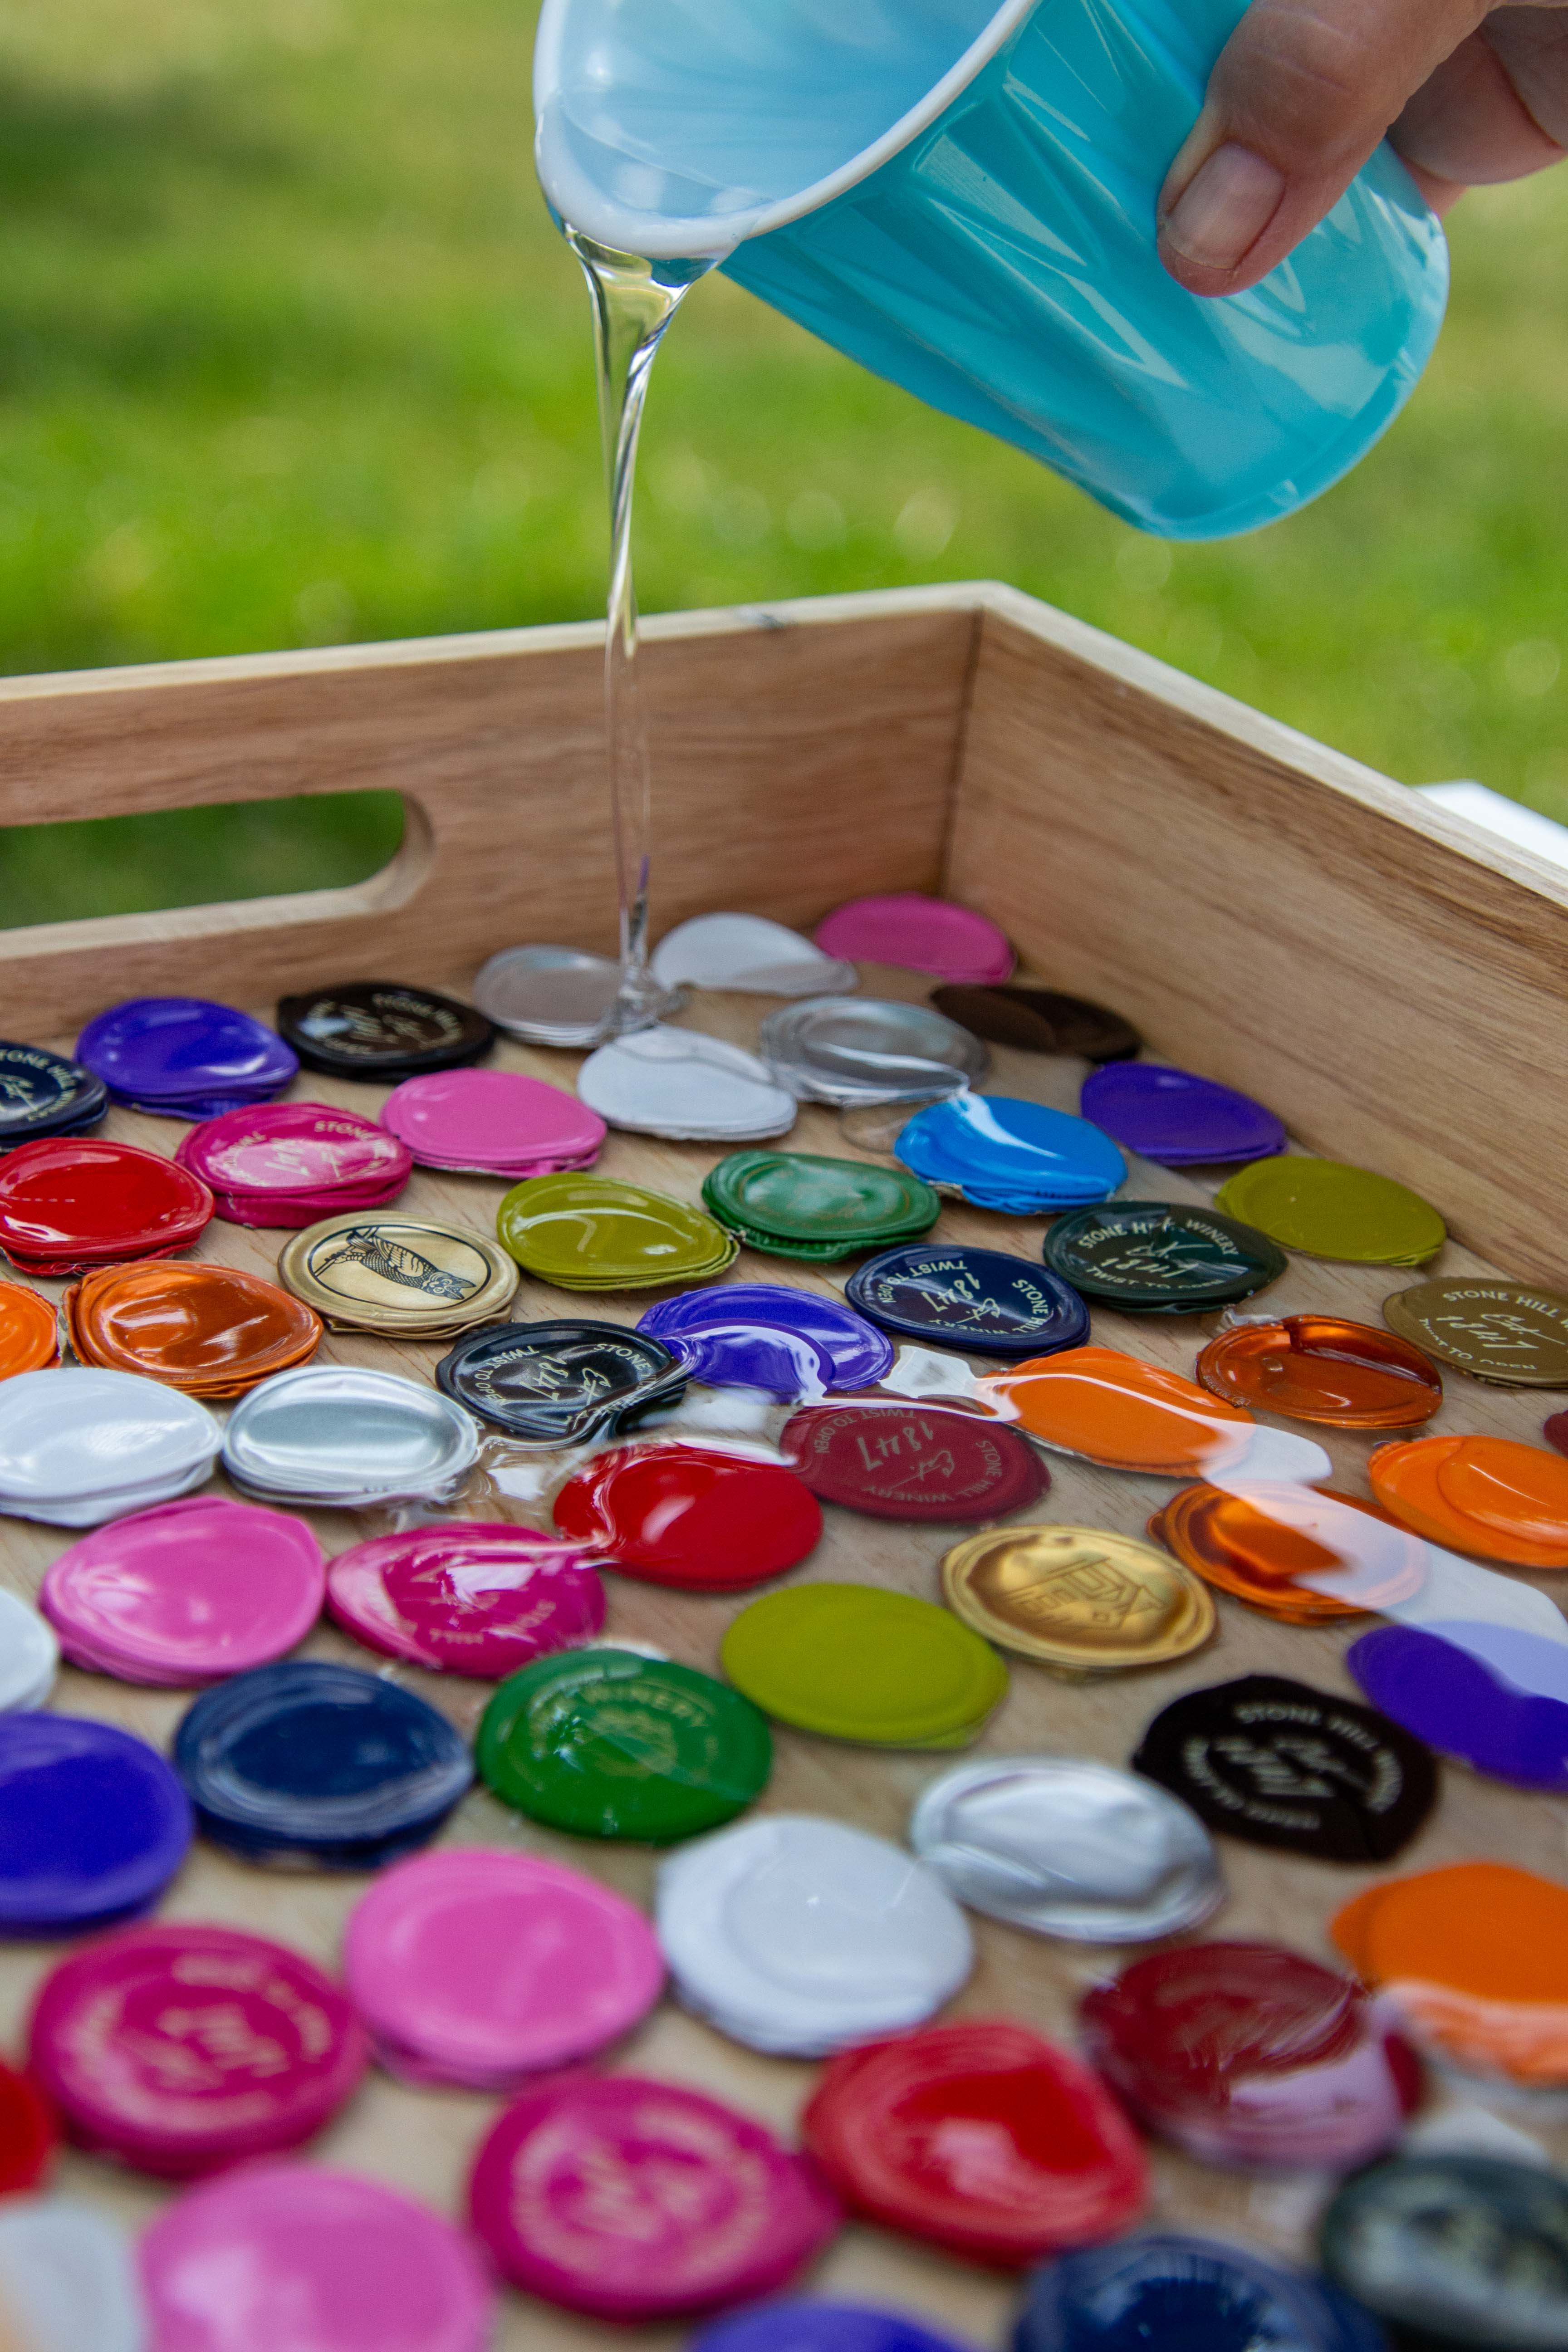 Resin poured over bottle caps